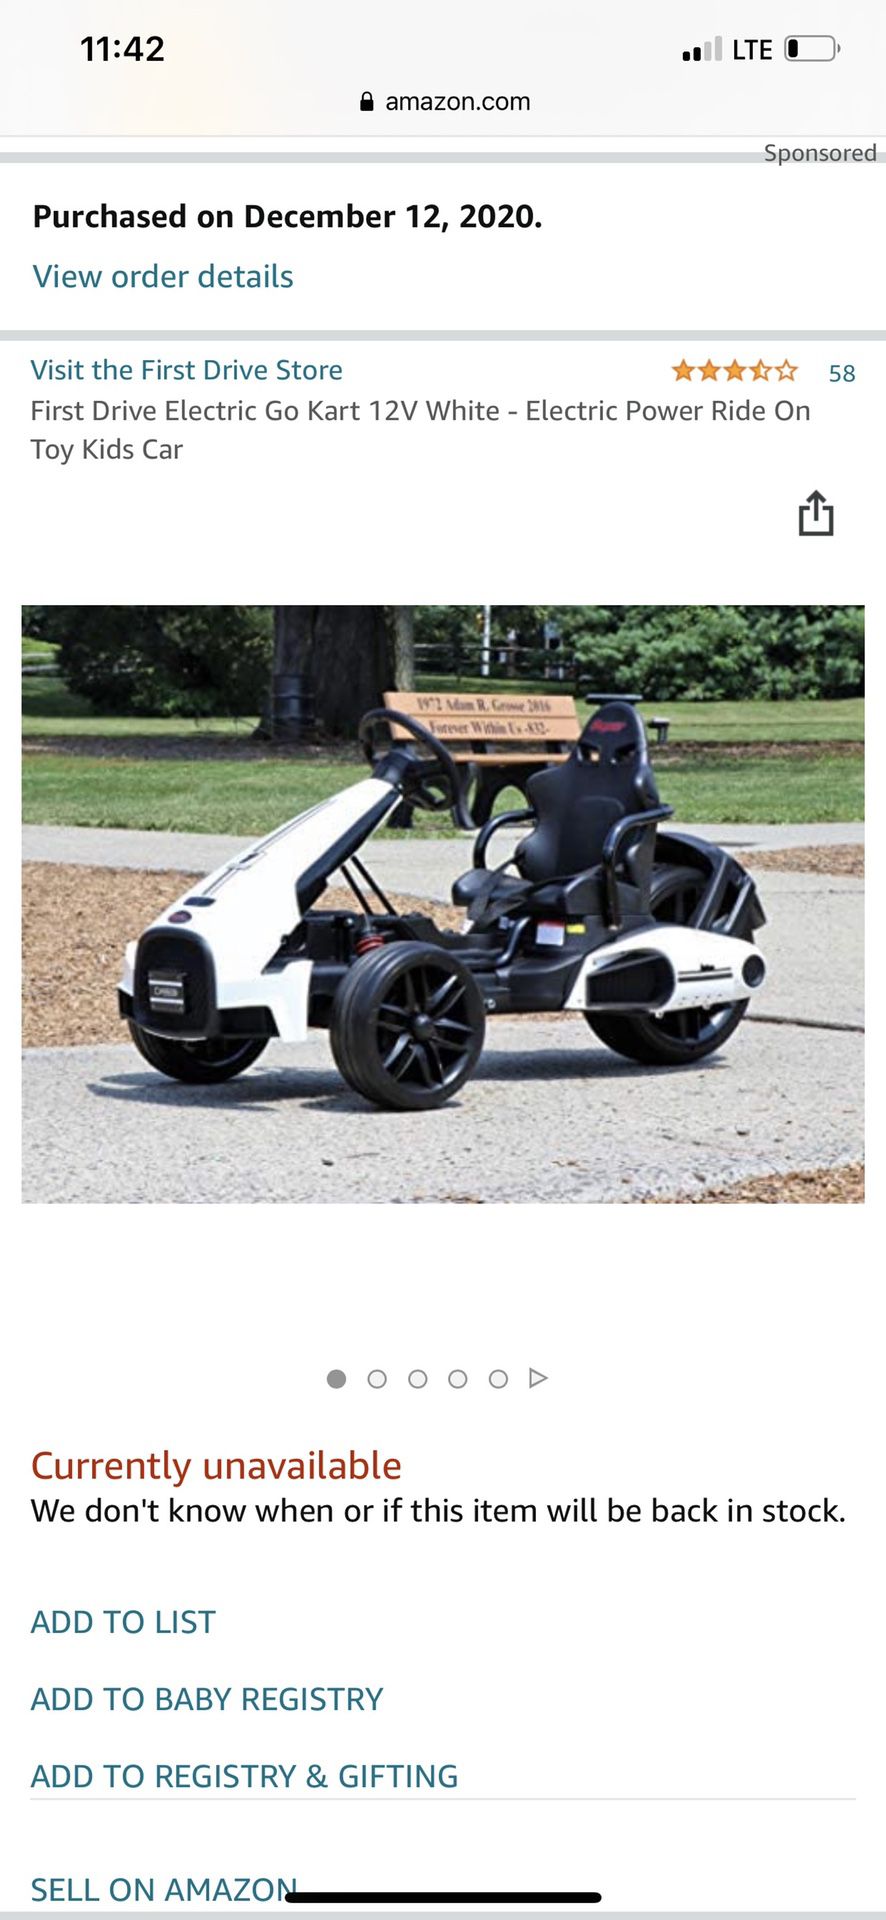 First Drive Electric Go Kart